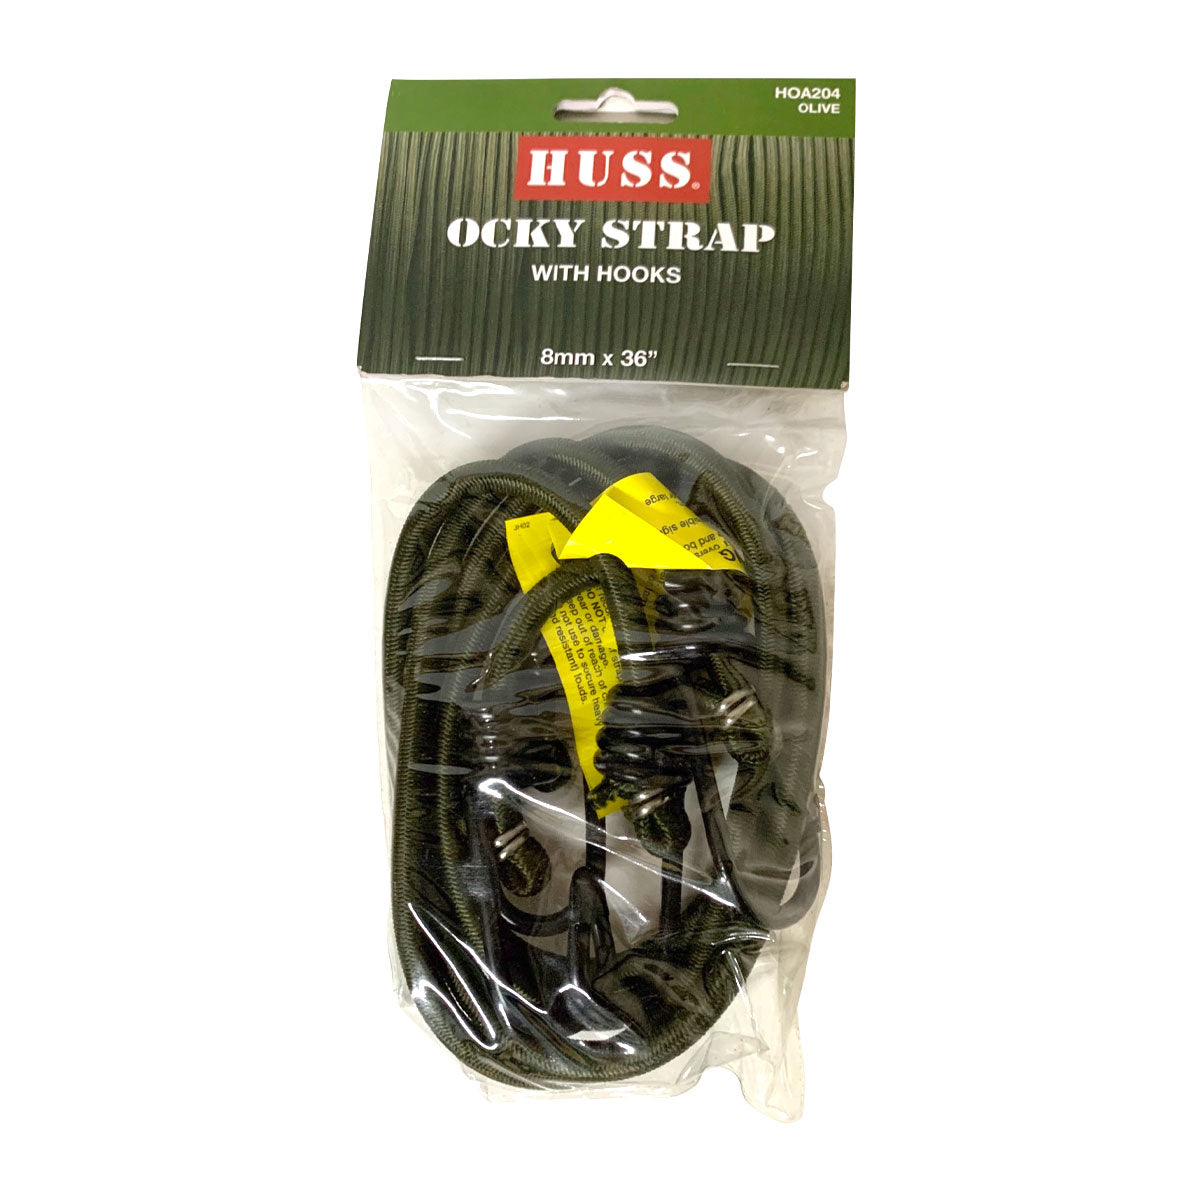 Combat Clothing Huss Ocky Strap Pack of 2 Olive Green Accessories Combat Clothing Australia 8mm x 36” Tactical Gear Supplier Tactical Distributors Australia